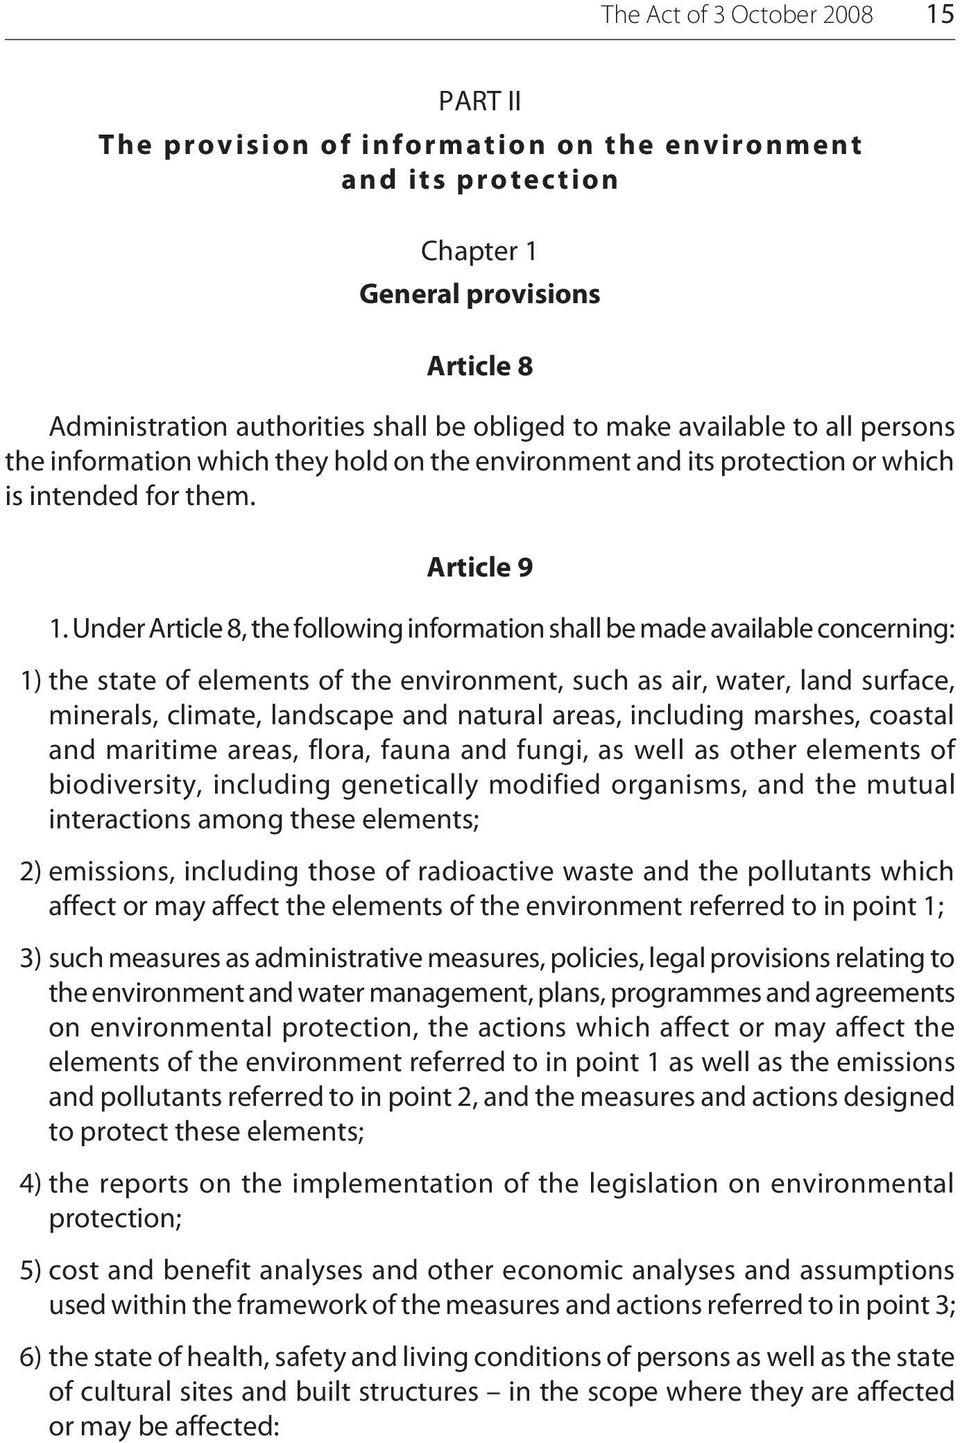 Under Article 8, the following information shall be made available concerning: 1) the state of elements of the environment, such as air, water, land surface, minerals, climate, landscape and natural